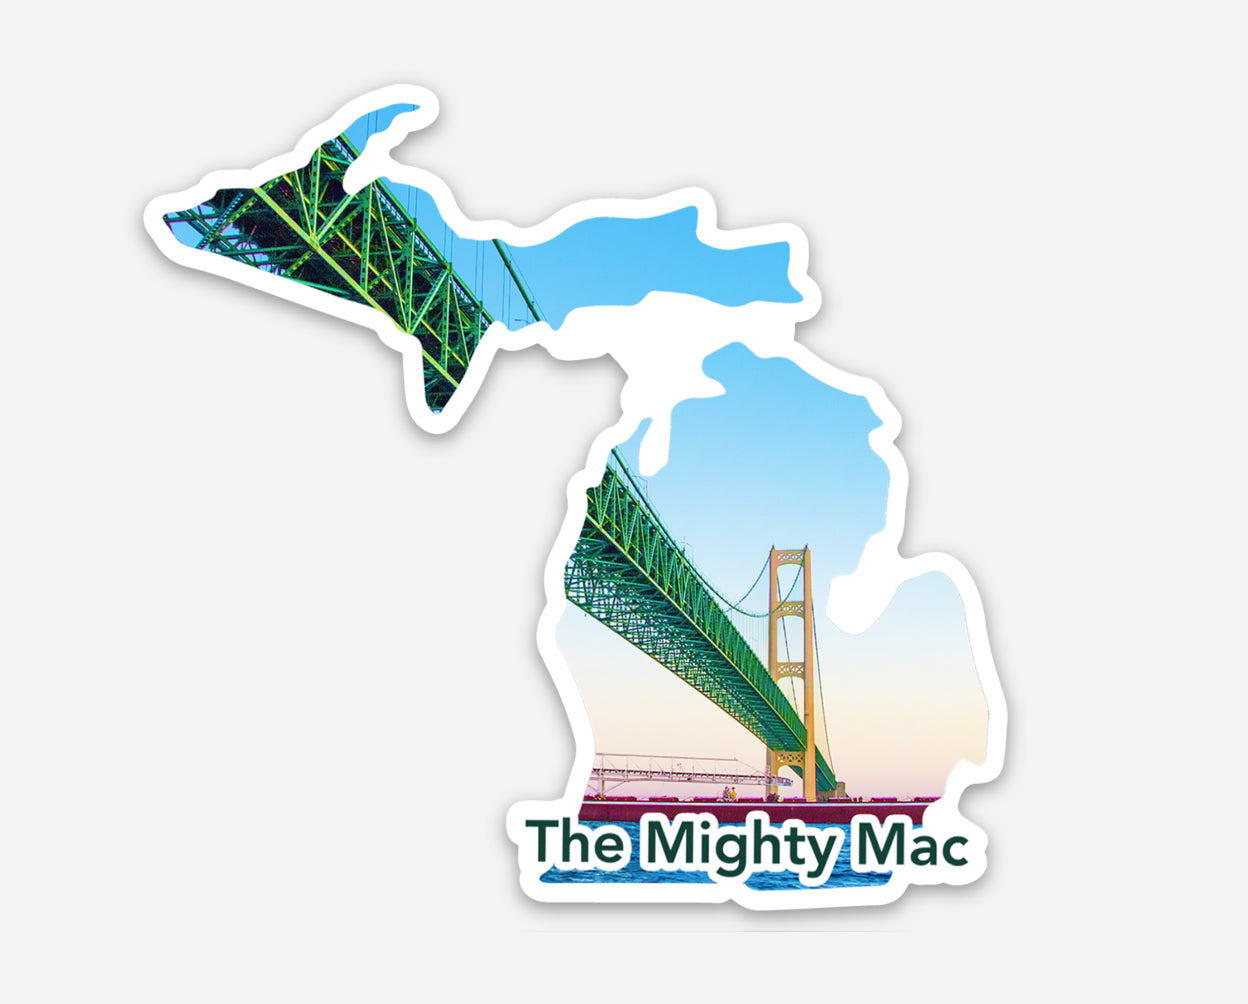 This design features an image of the Mackinac Bridge framed inside the shape of Michigan.  The Mighty Mac spans the Great Lakes connecting Michigan's upper and lower peninsulas. 